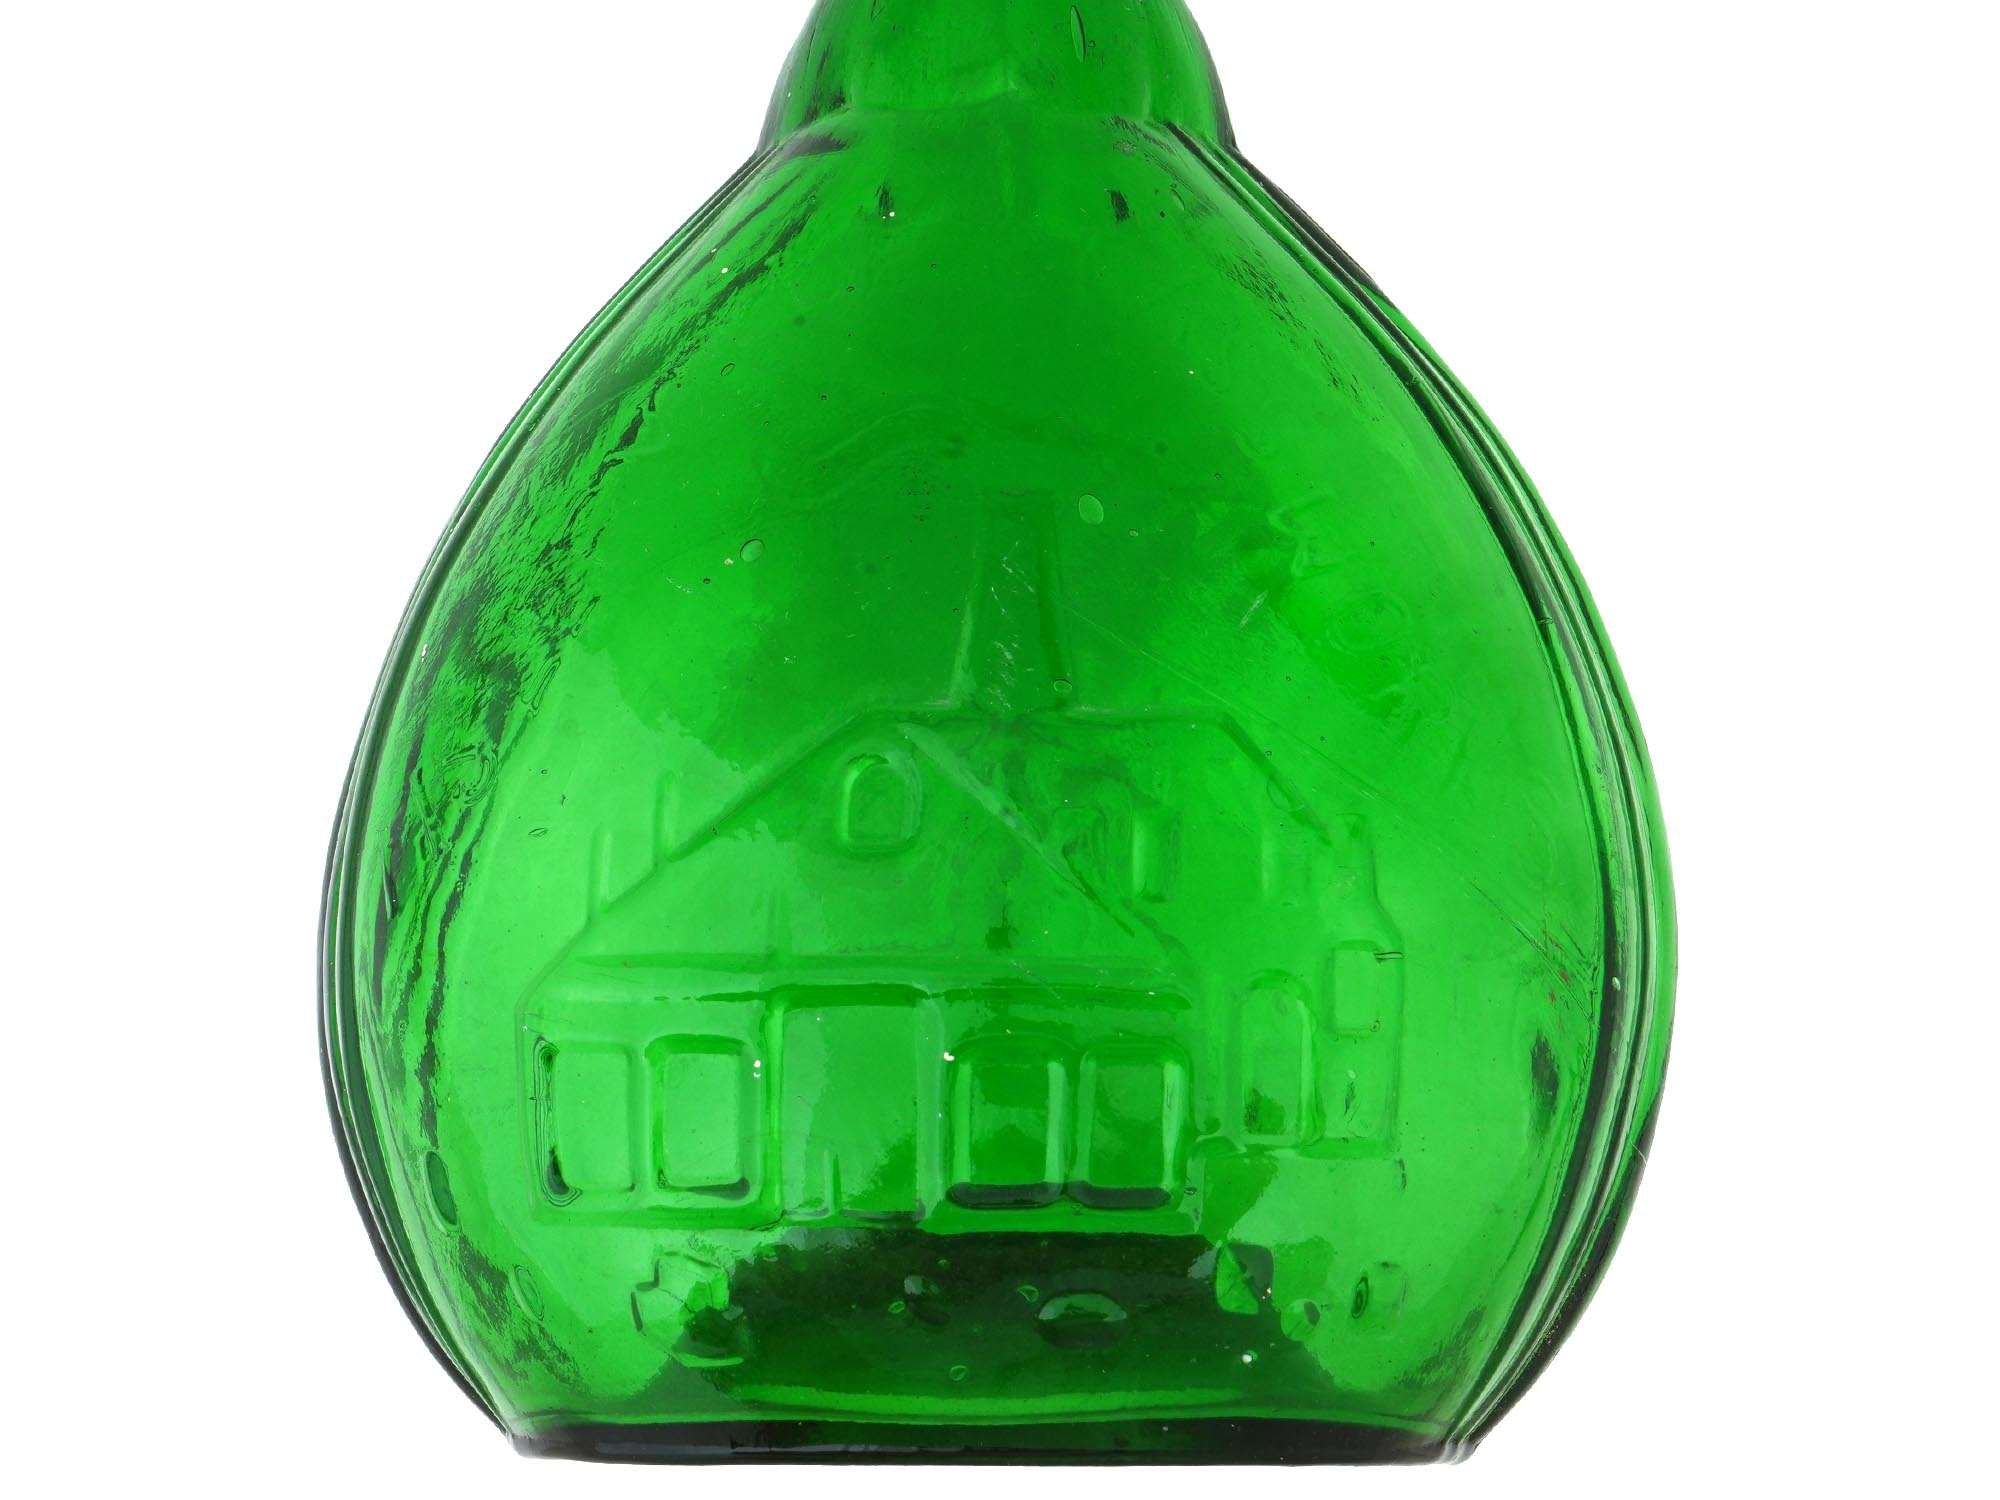 VINTAGE GREEN GLASS BOTTLES SUNSWEET AND RELIEF IMAGES PIC-7